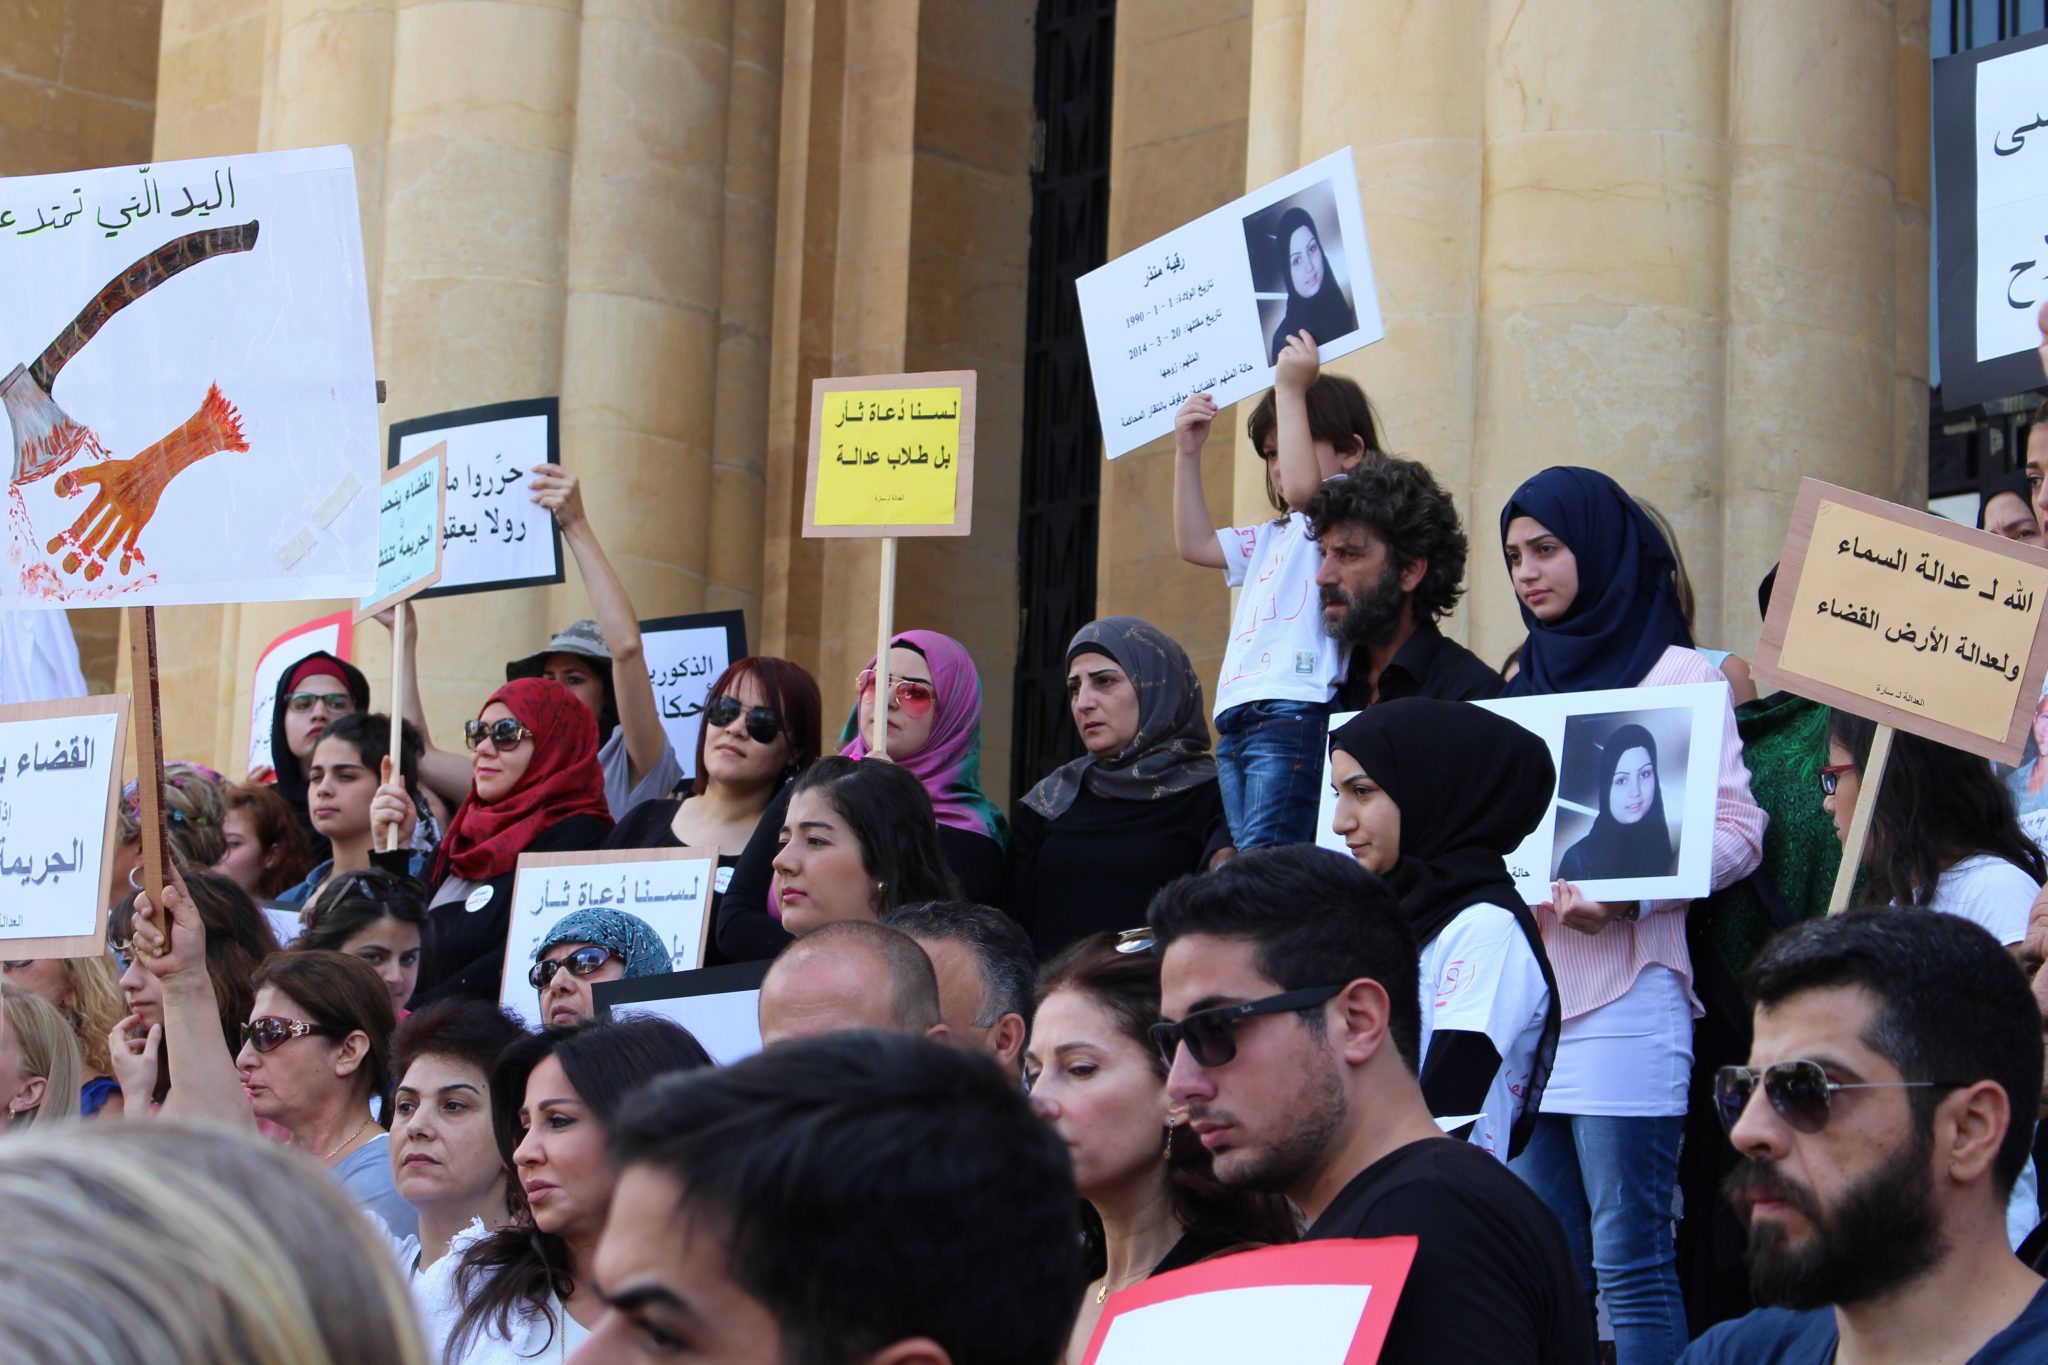 Our partner organisation Kafa organised a protest to call attention to several domestic violence cases (in which wives were murdered by their husbands) stuck in court. Here, protesters gather outside Beirut's National Museum. Photo: Alexander Karlsdotter Stenström